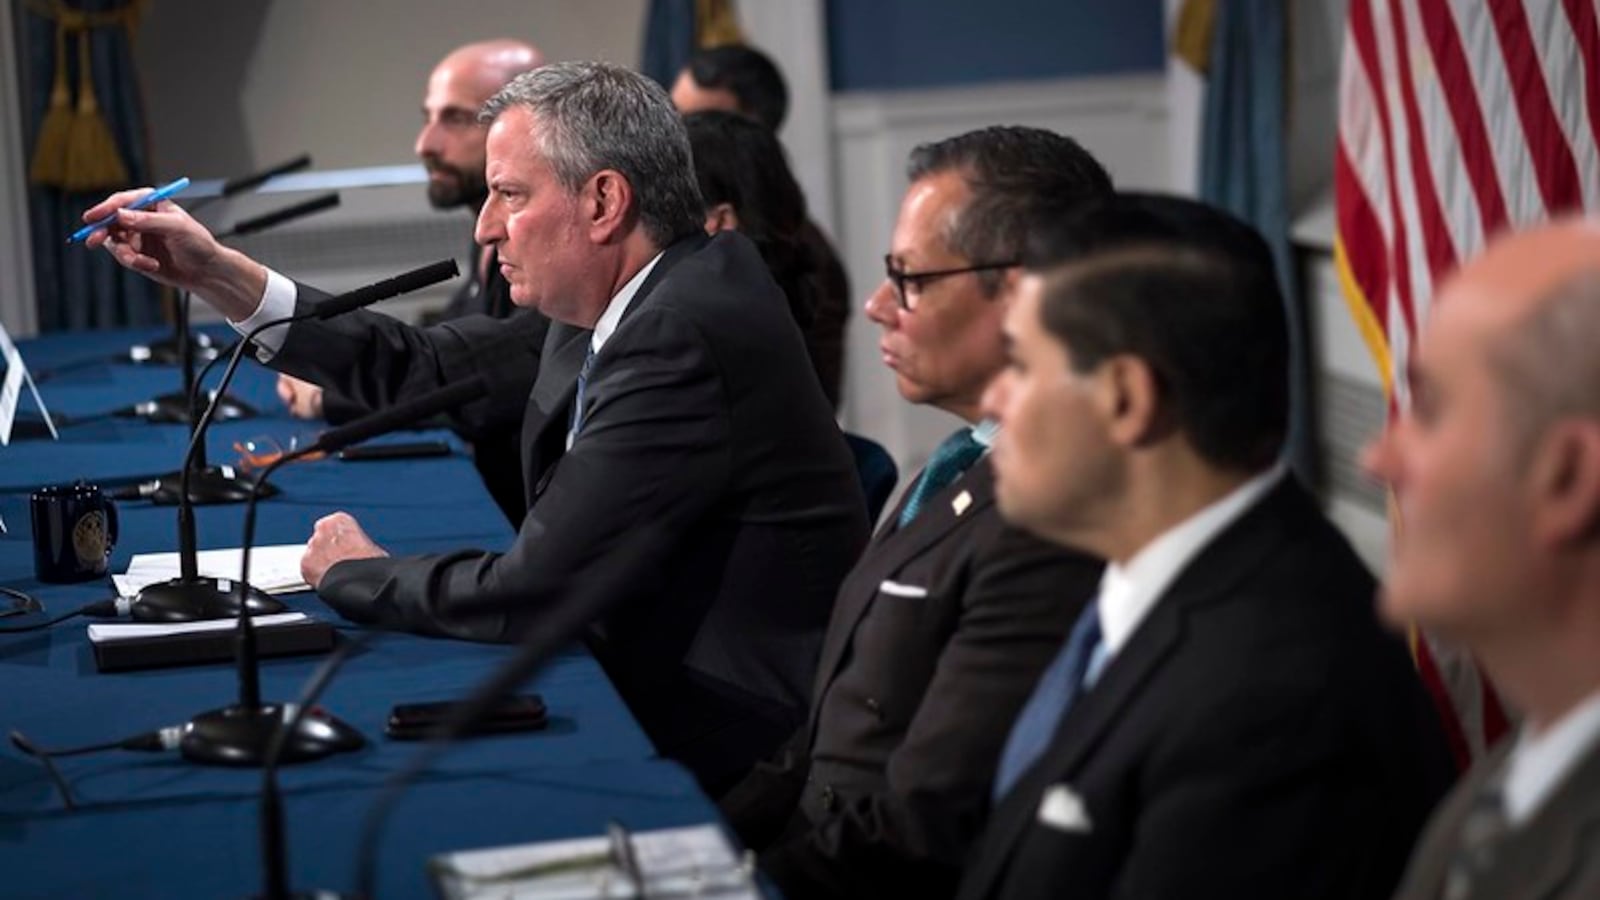 Mayor Bill de Blasio is joined by health officials and Chancellor Richard Carranza for an update on the coronavirus.